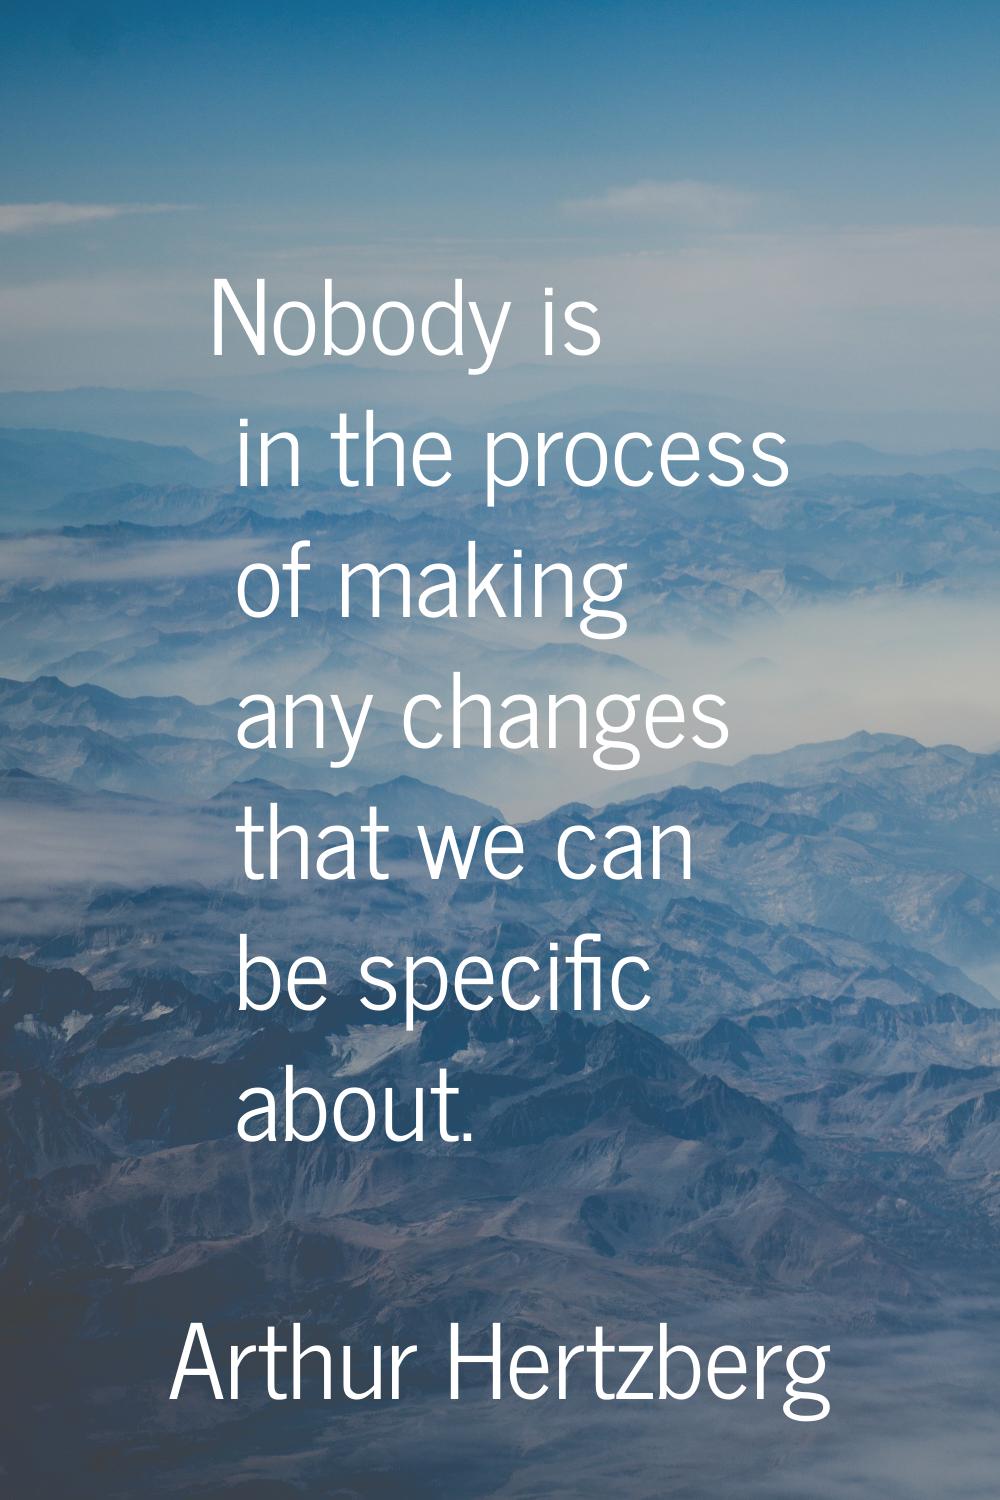 Nobody is in the process of making any changes that we can be specific about.